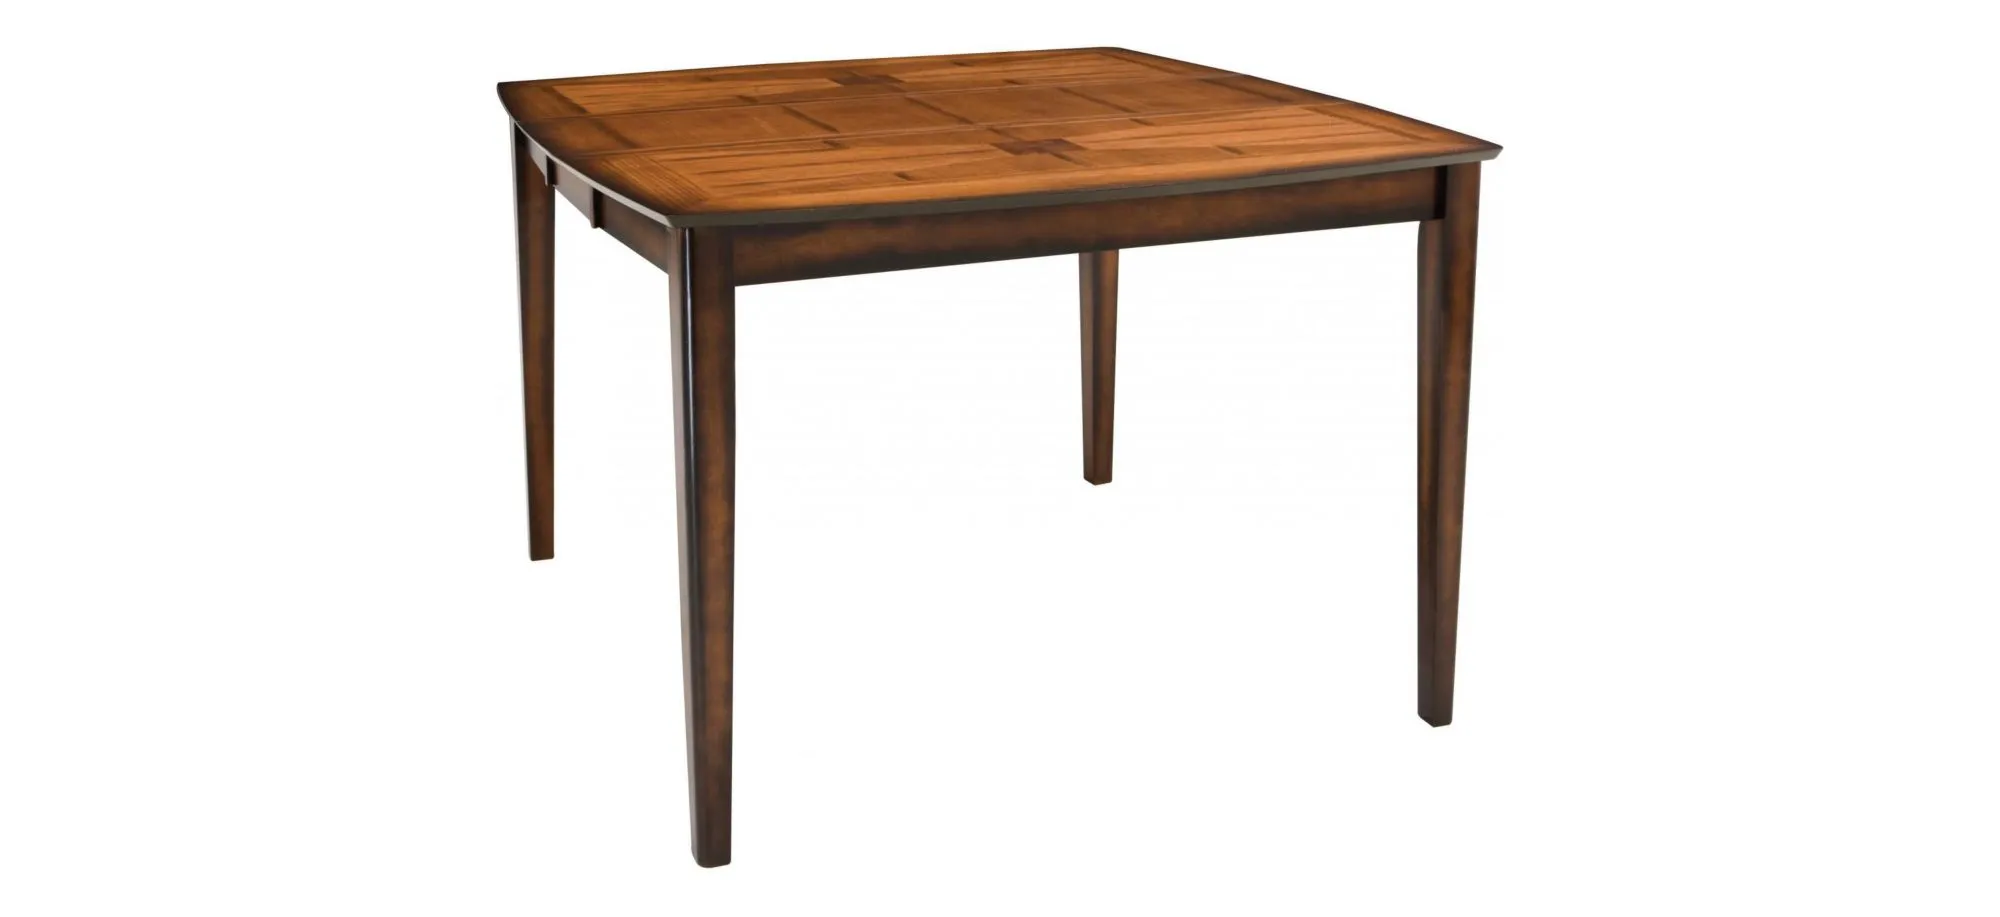 Denver Counter-Height Dining Table w/ Leaf in Amber / Dark Brown by Homelegance